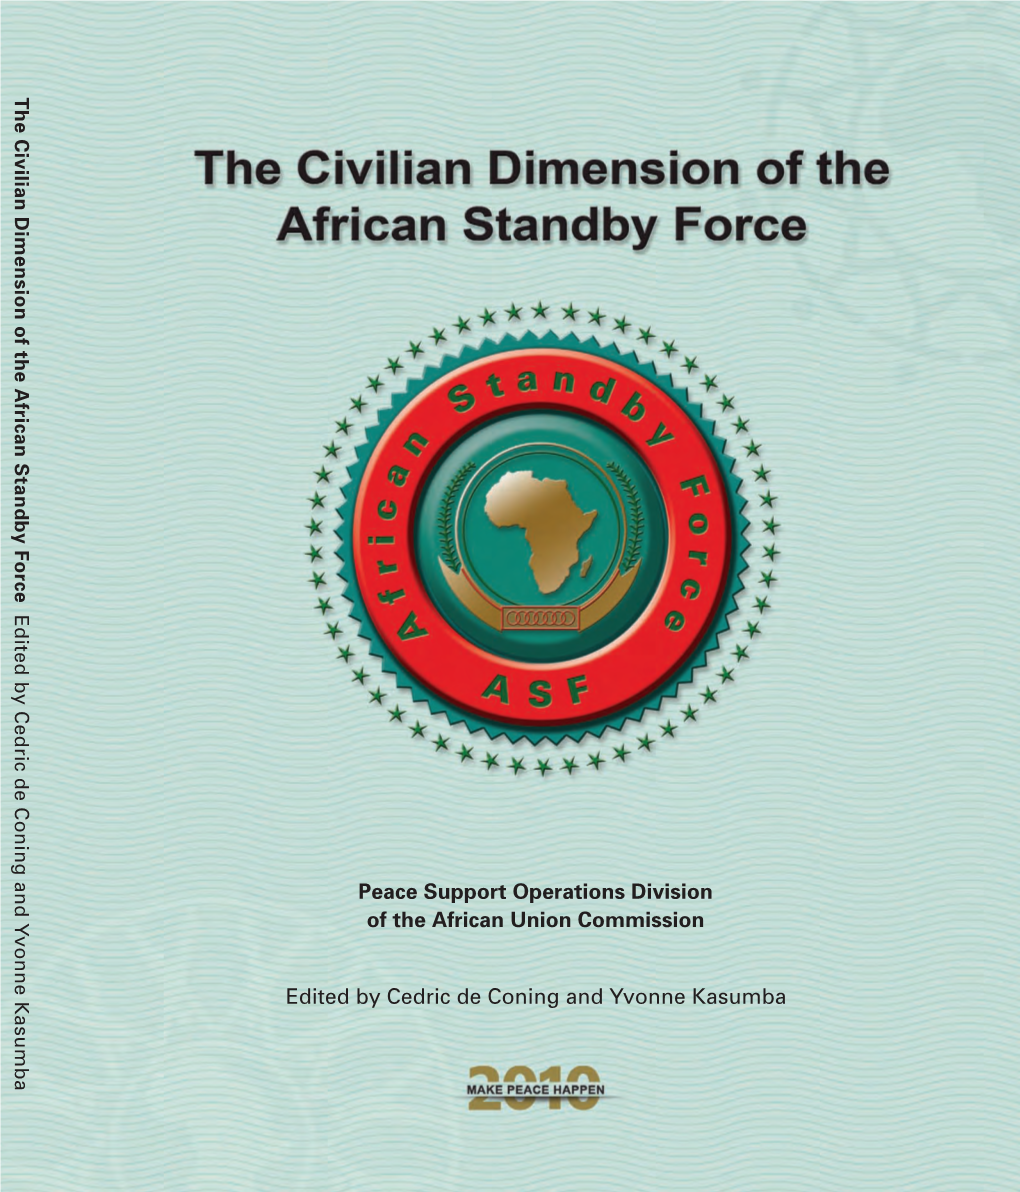 The African Standby Force